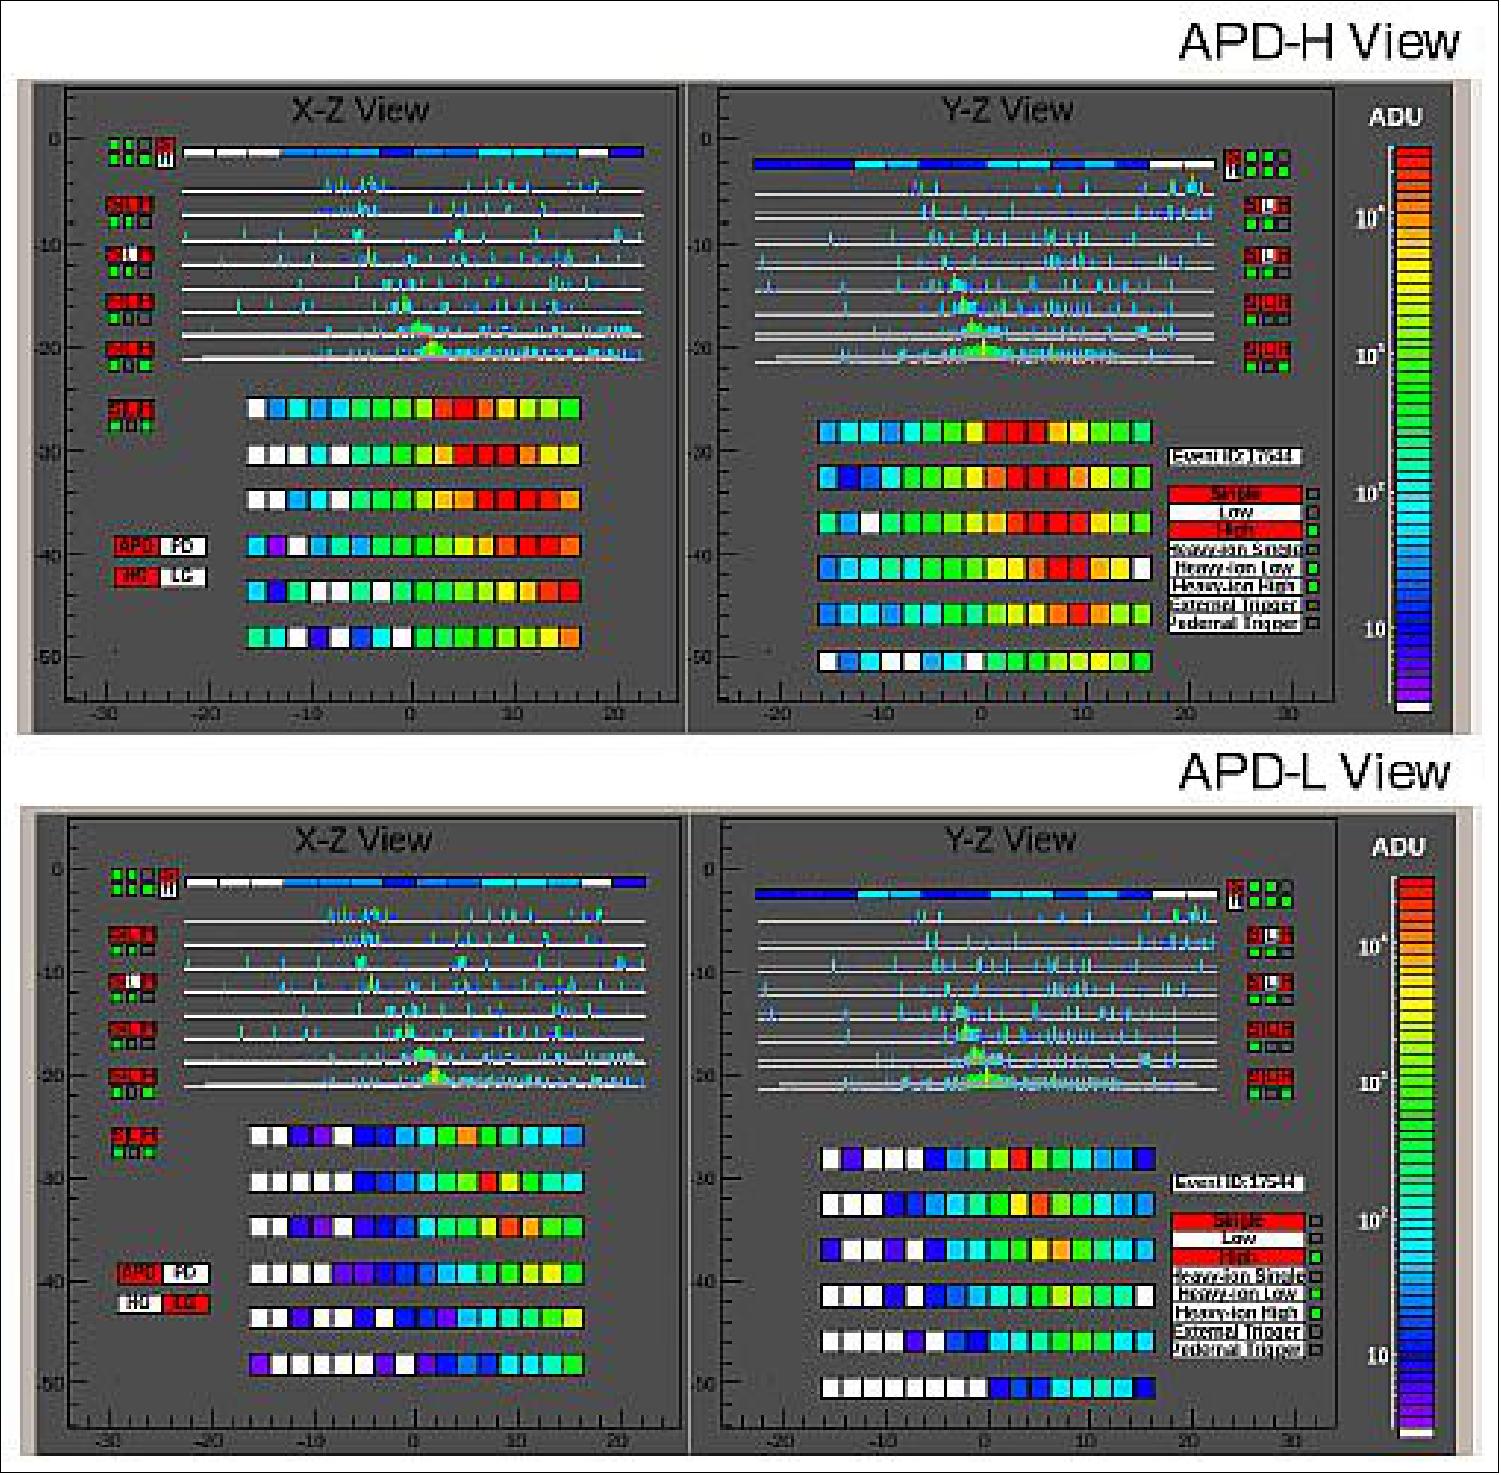 Figure 12: Event image acquired at higher sensitivity (top) and lower sensitivity (bottom). It is the raw data for the event image of electrons (candidates) in the TeV region shown in Figure 11 (image credit: JAXA, Waseda University)